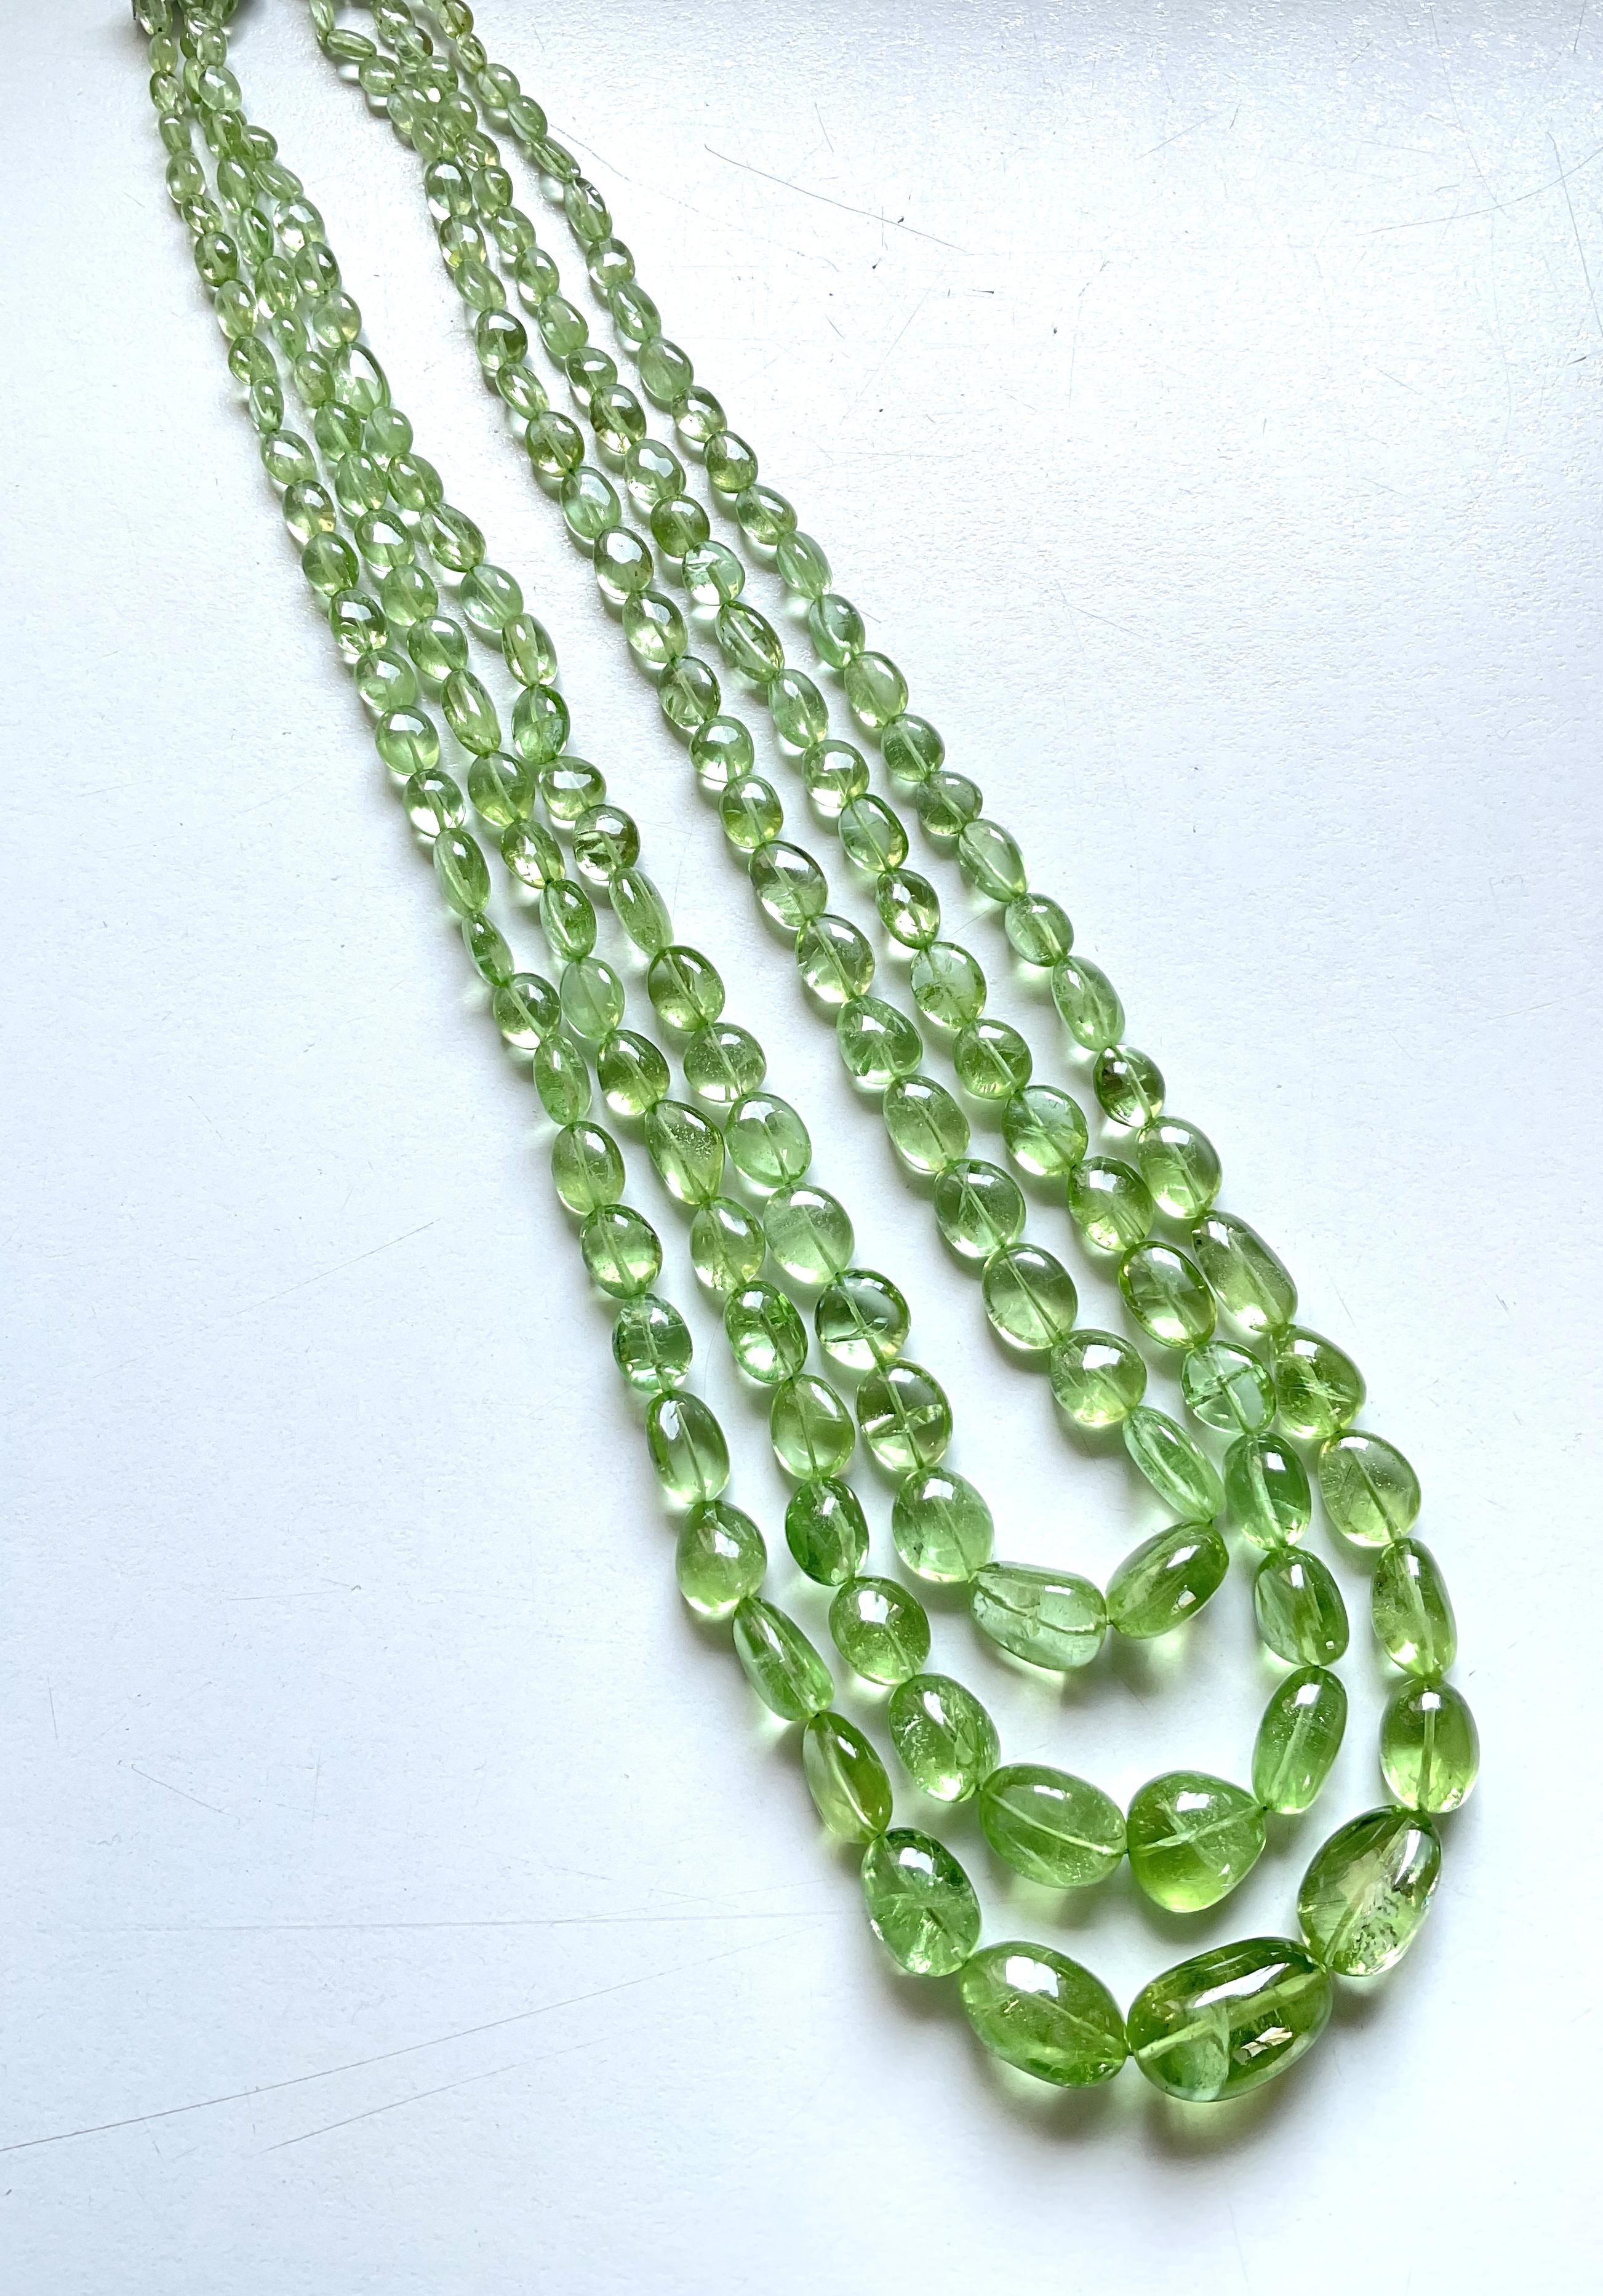 507.40 carats apple green peridot top quality plain tumbled natural necklace gem

Gemstone - Peridot
Size : 4x3 To 18x12
Weight : 507.40 Carats
Strand - 3 Line